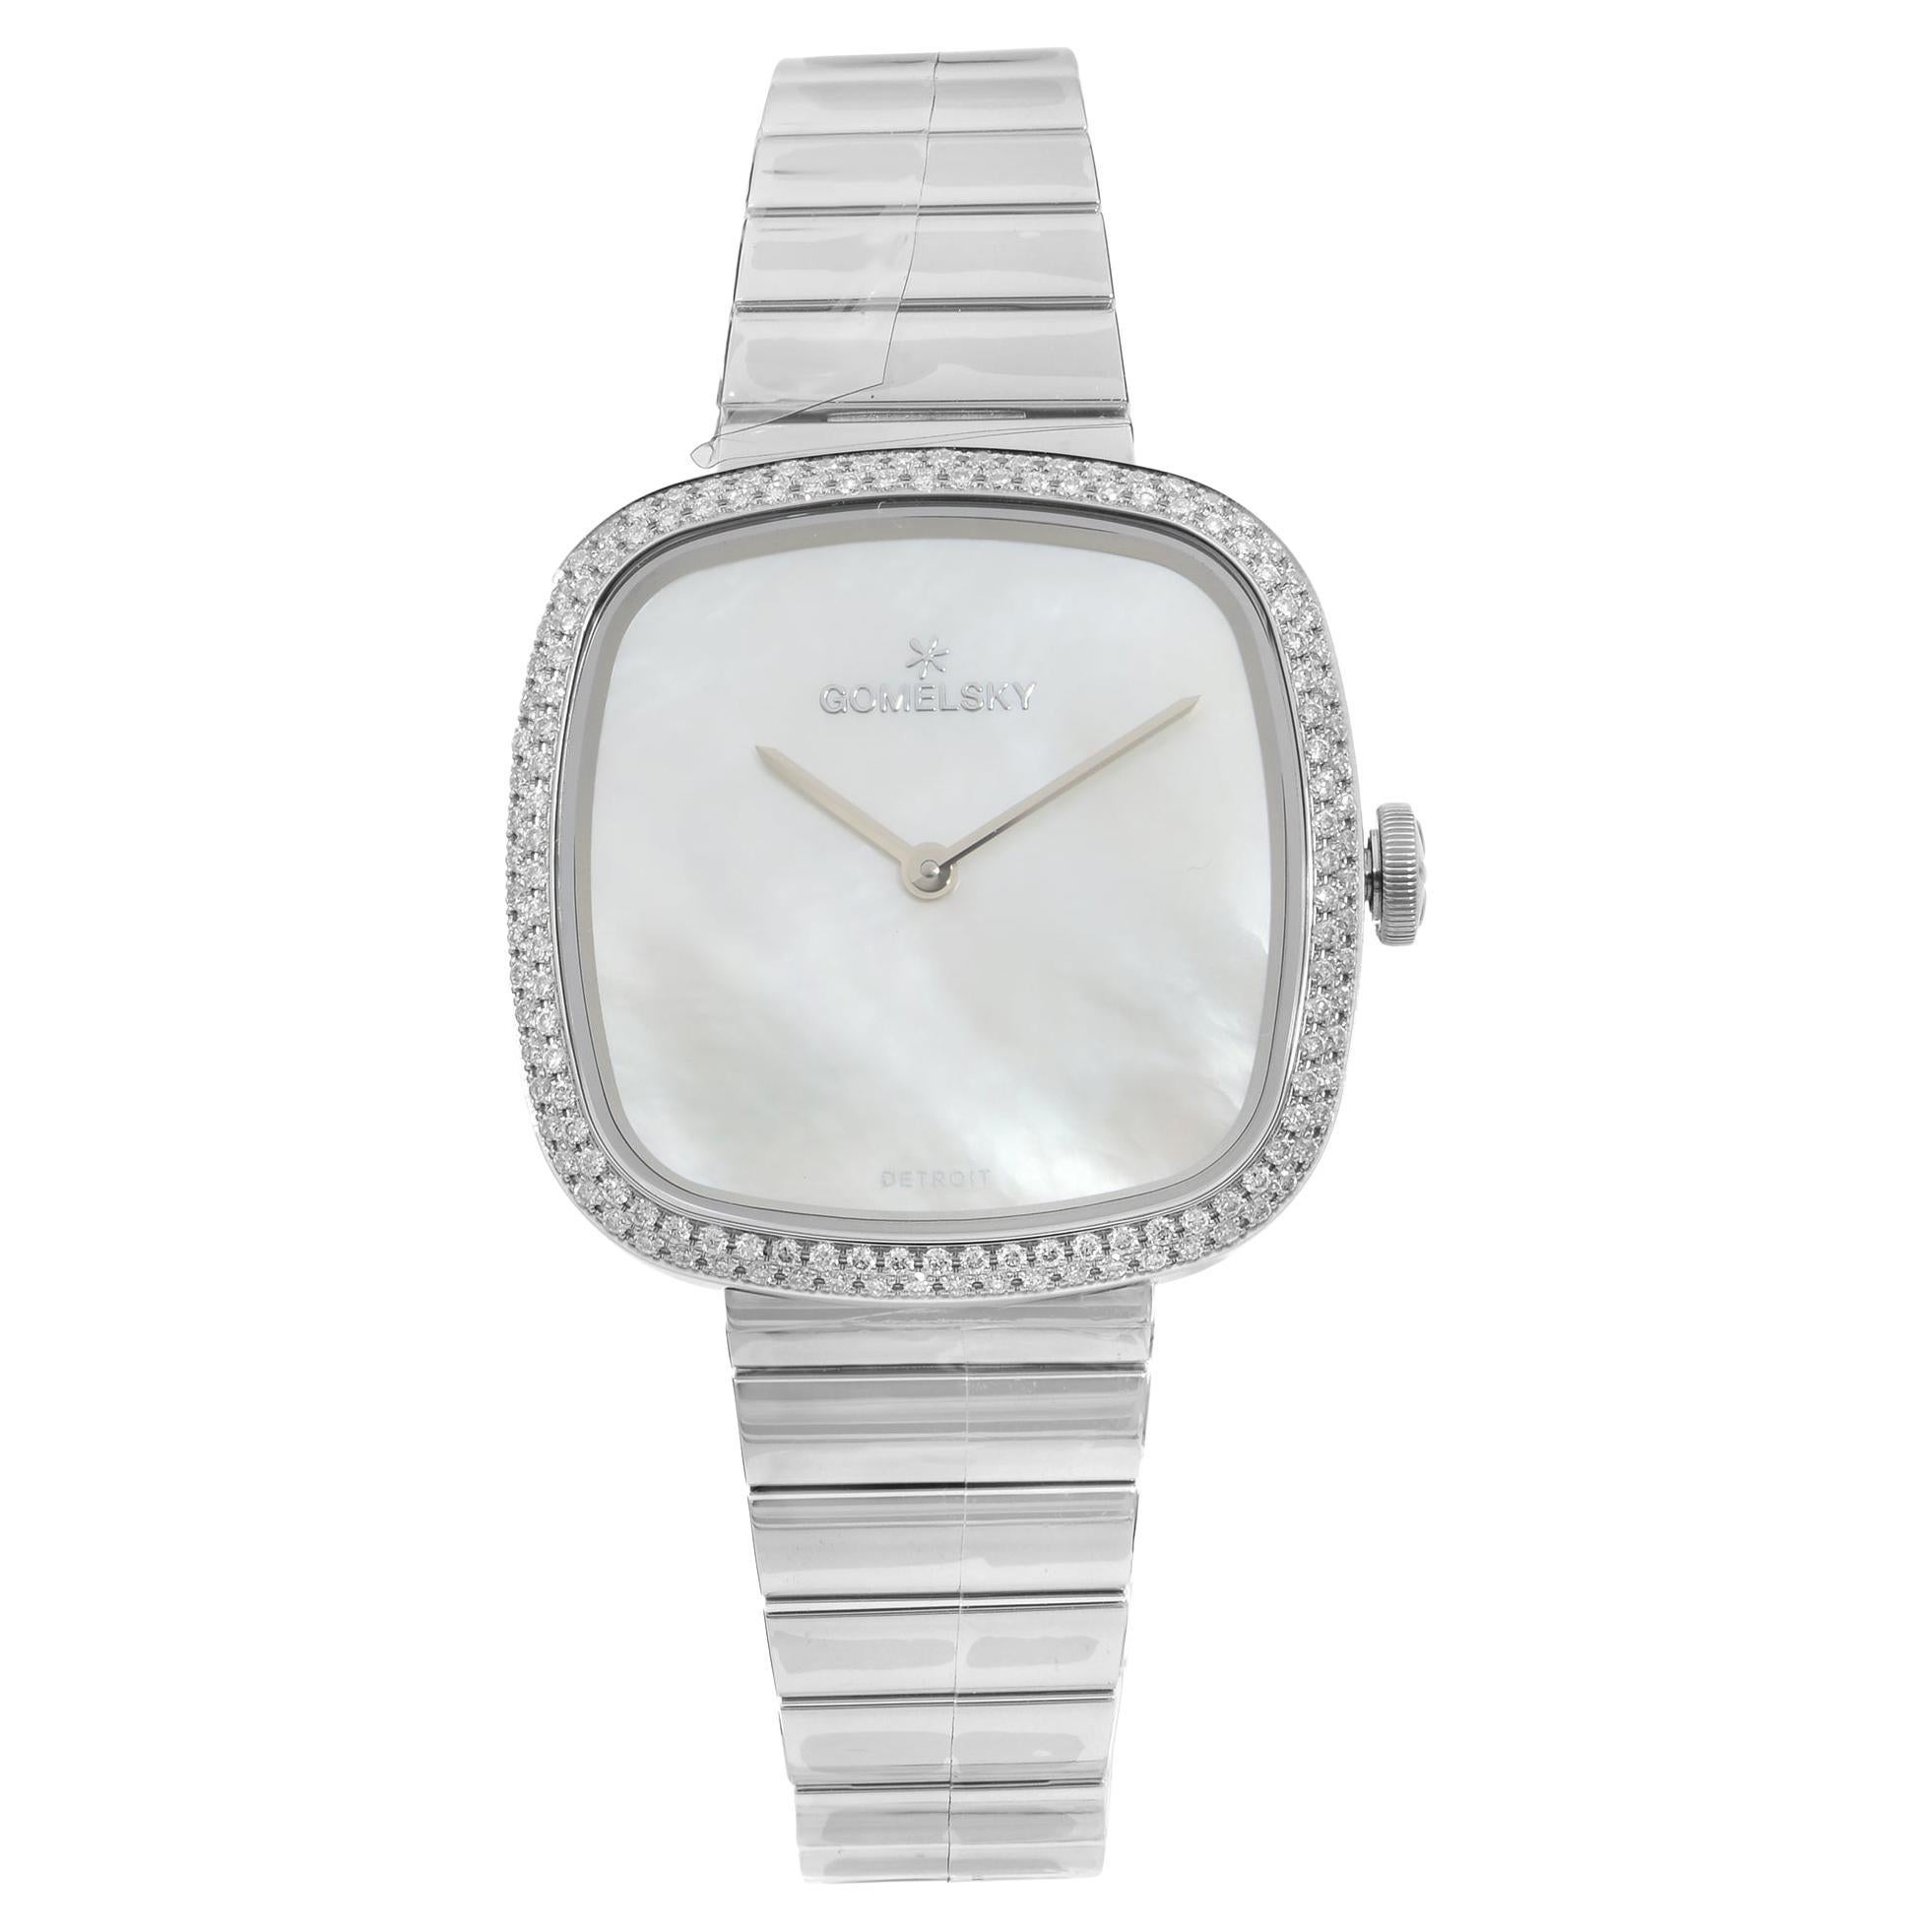 Gomelsky Eppie Sneed Stainless Steel Diamond MO Dial Ladies Watch G0120095028 For Sale